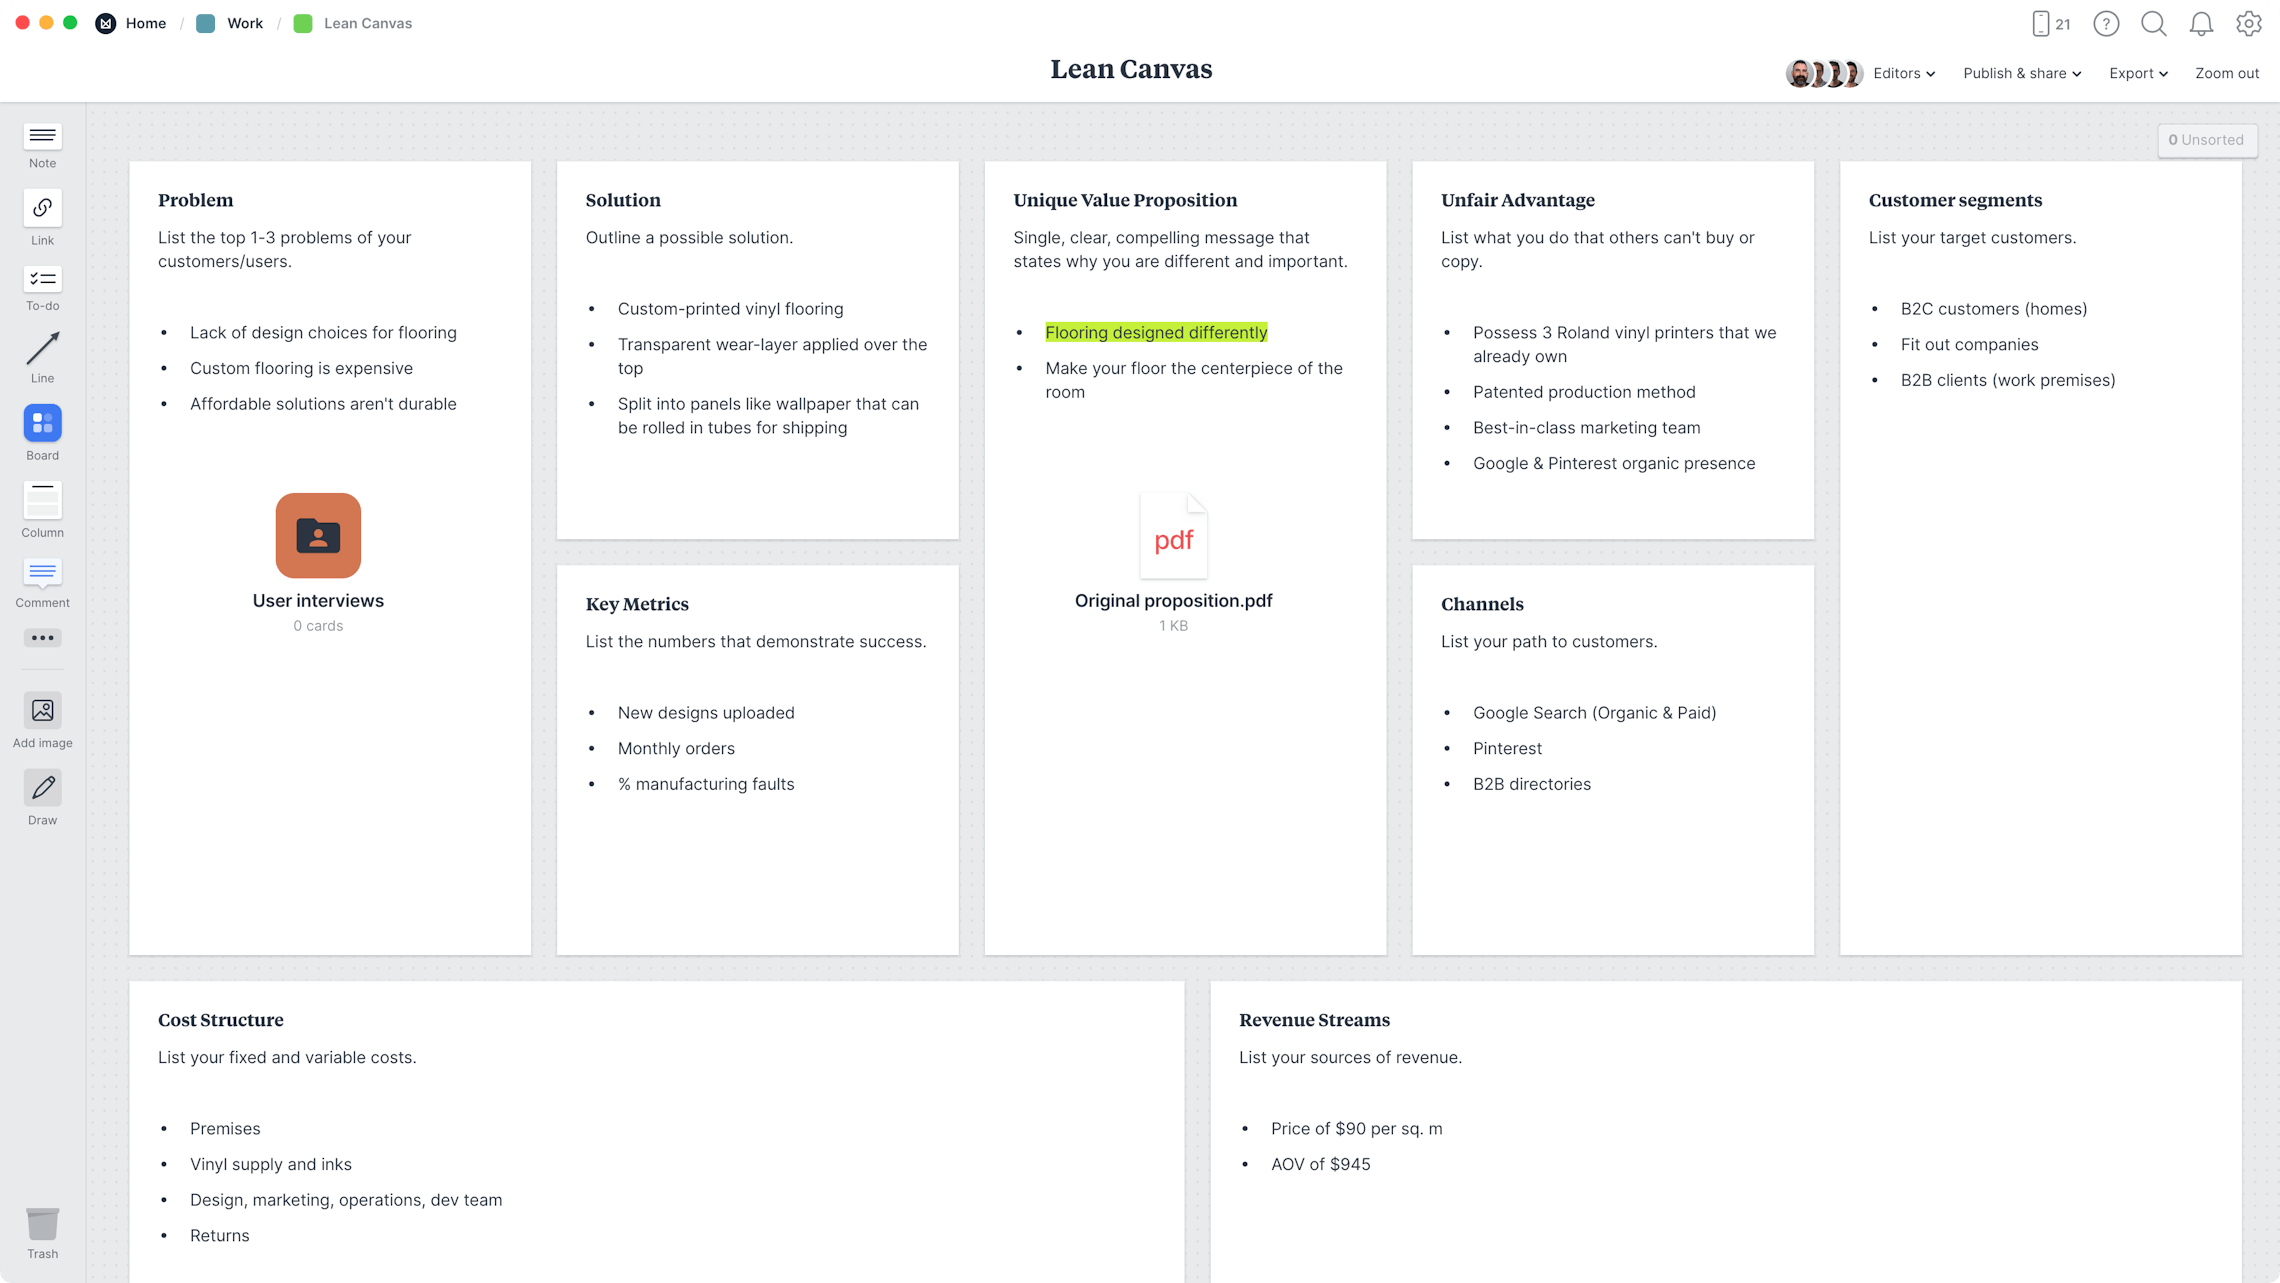 Lean Canvas Template, within the Milanote app